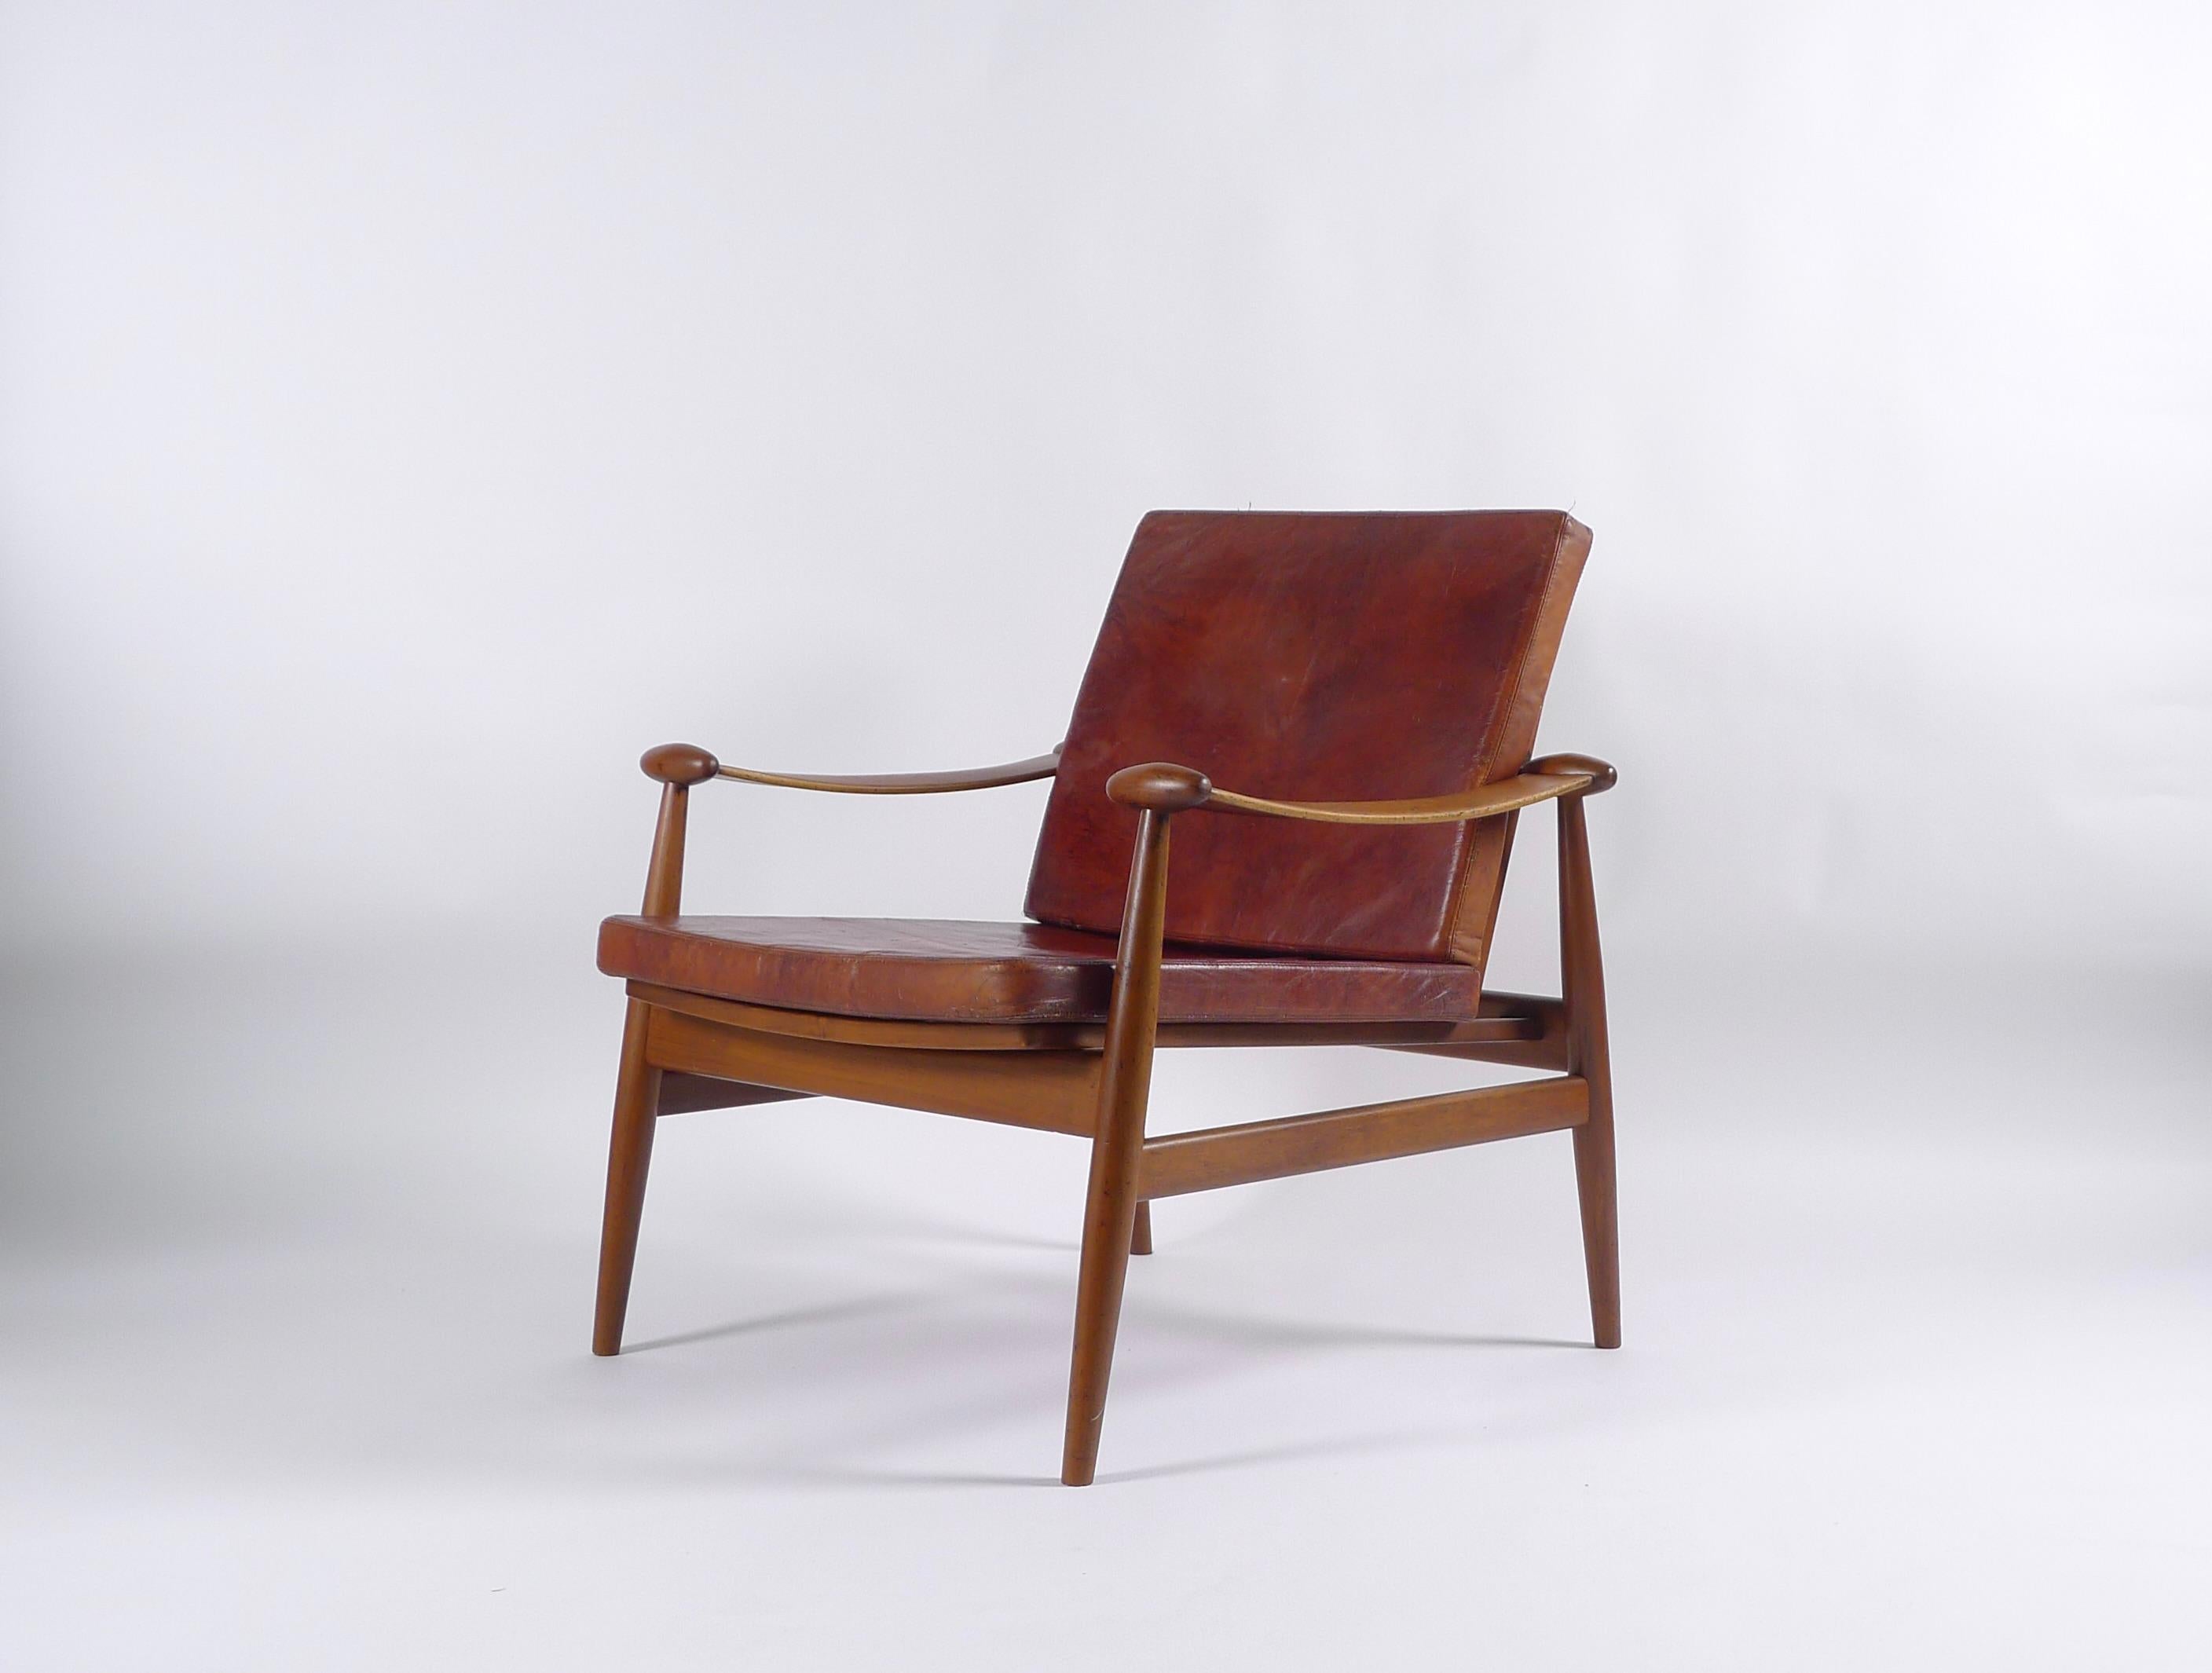 Leather Finn Juhl Spade Chair, Model Fd133, 1950s, Produced by France & Son, with Label